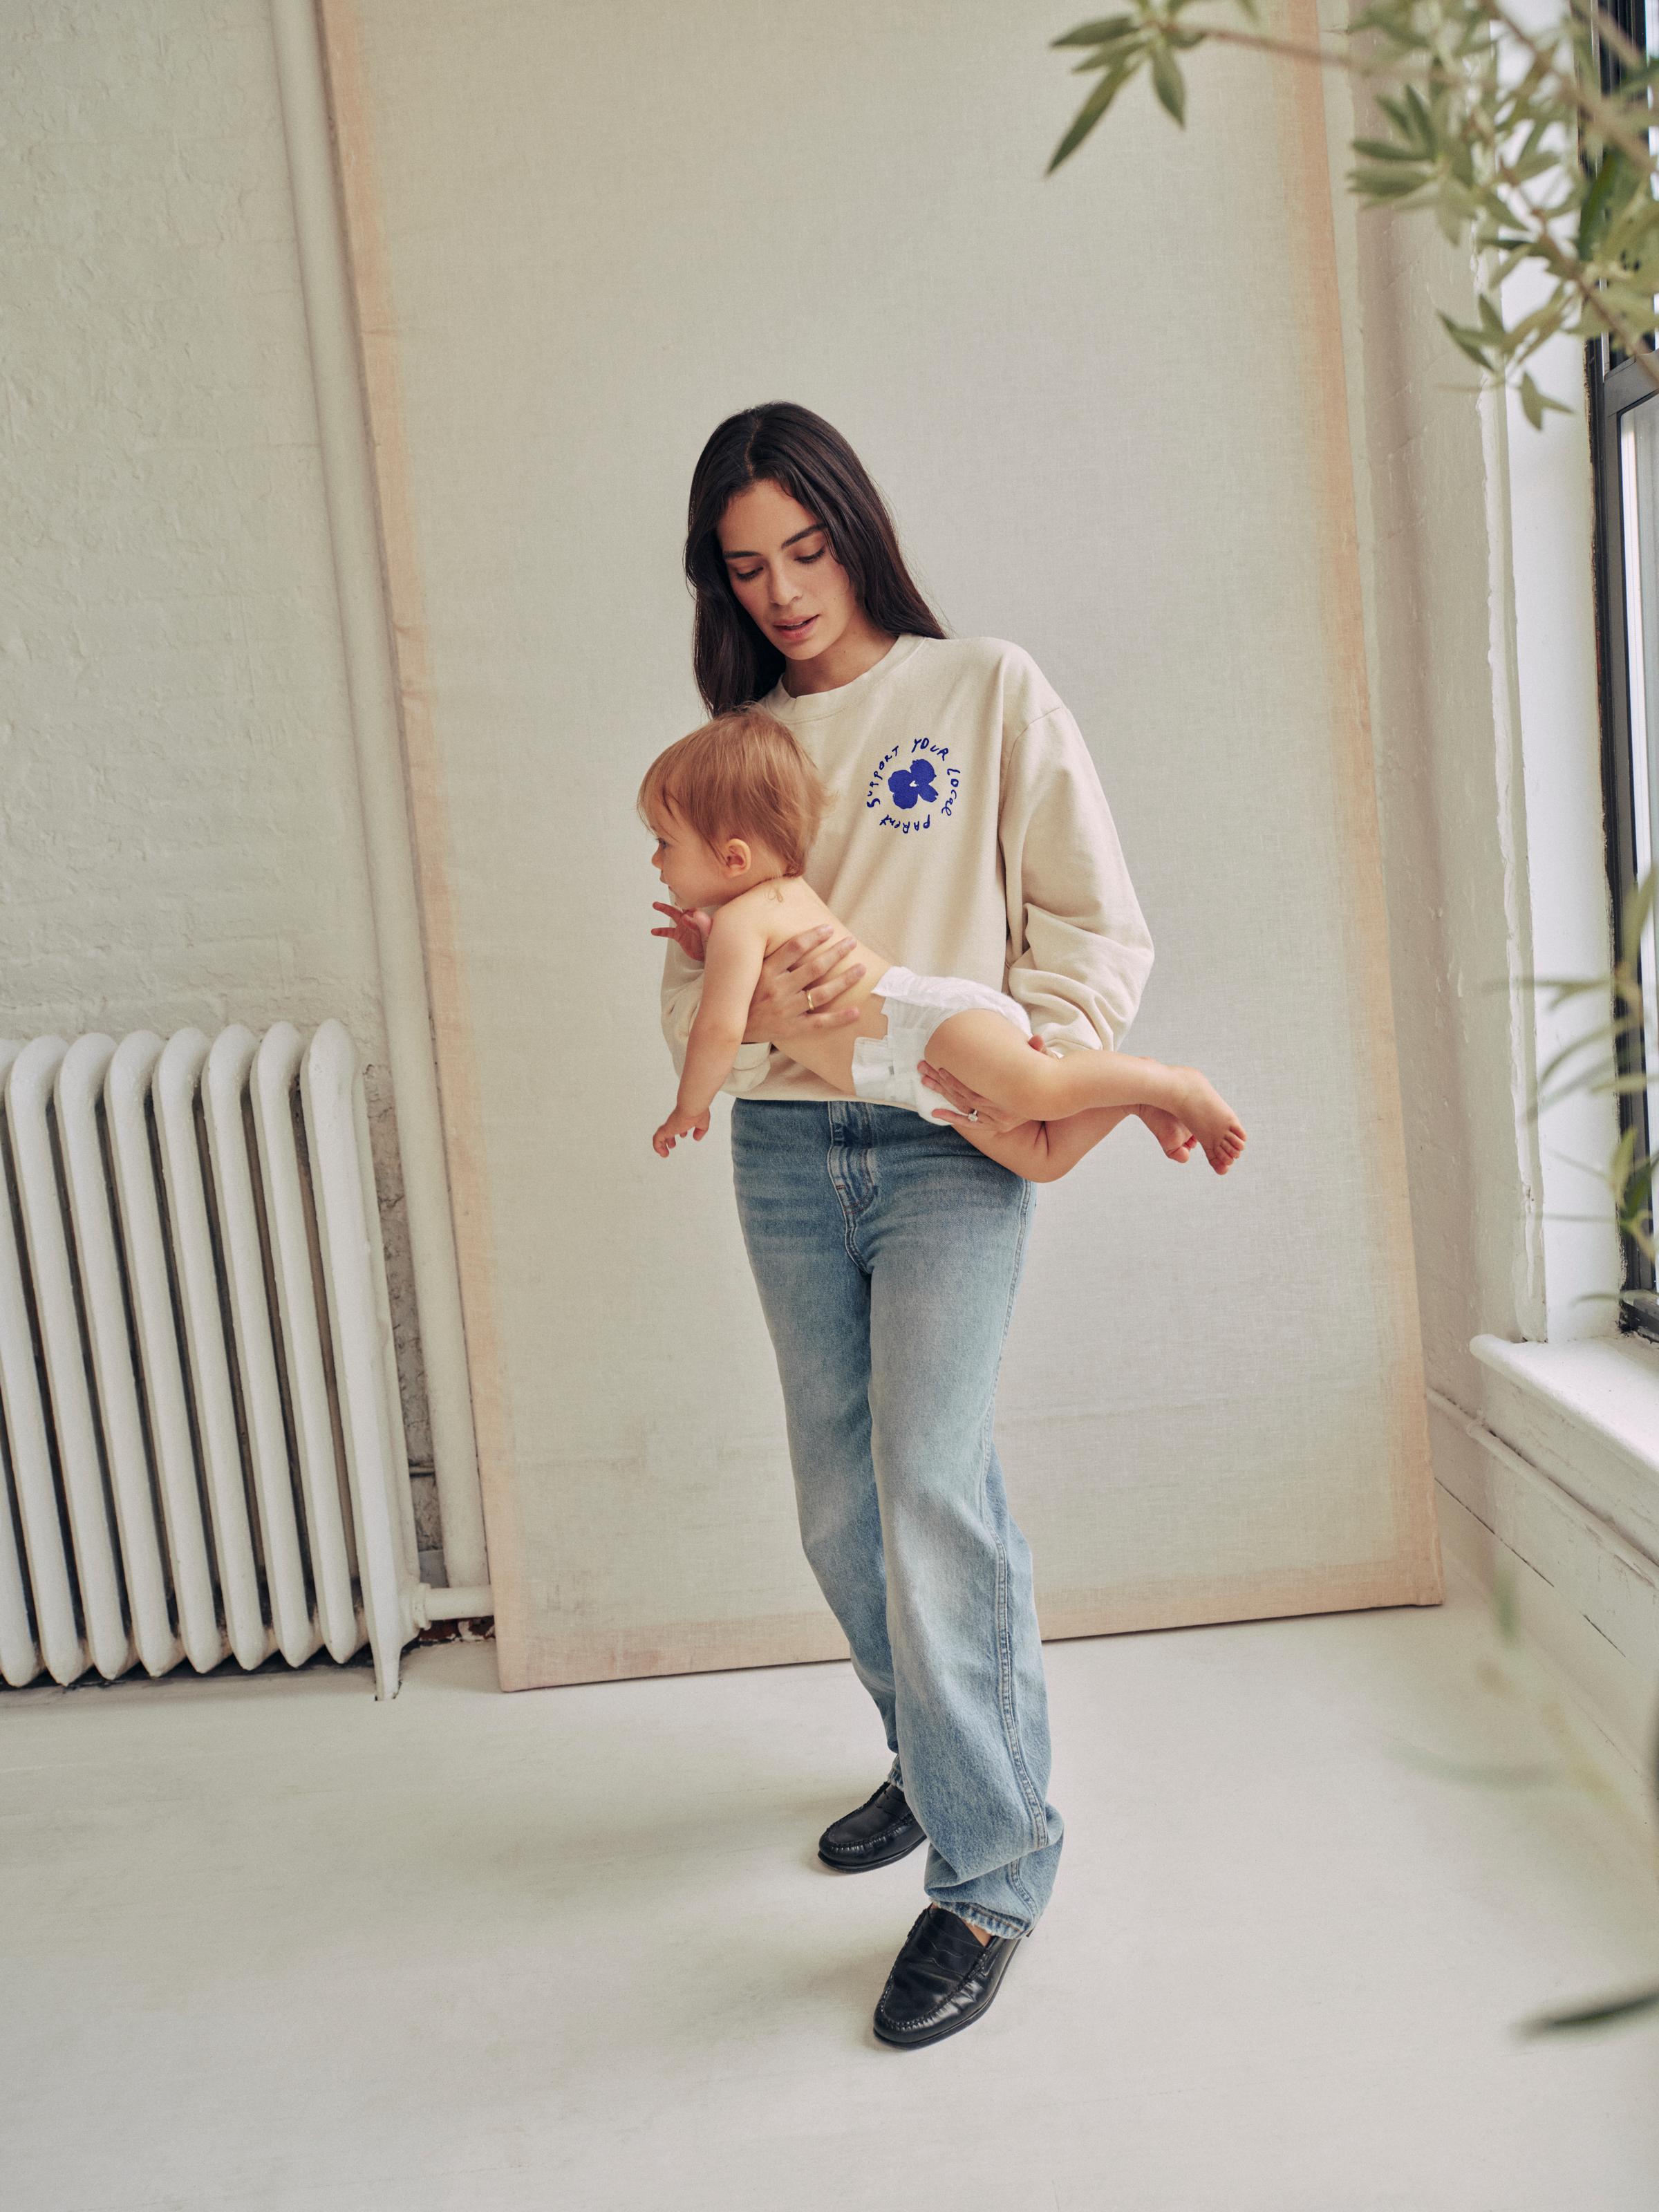 A woman is holding a baby while wearing the SYLP crewneck.